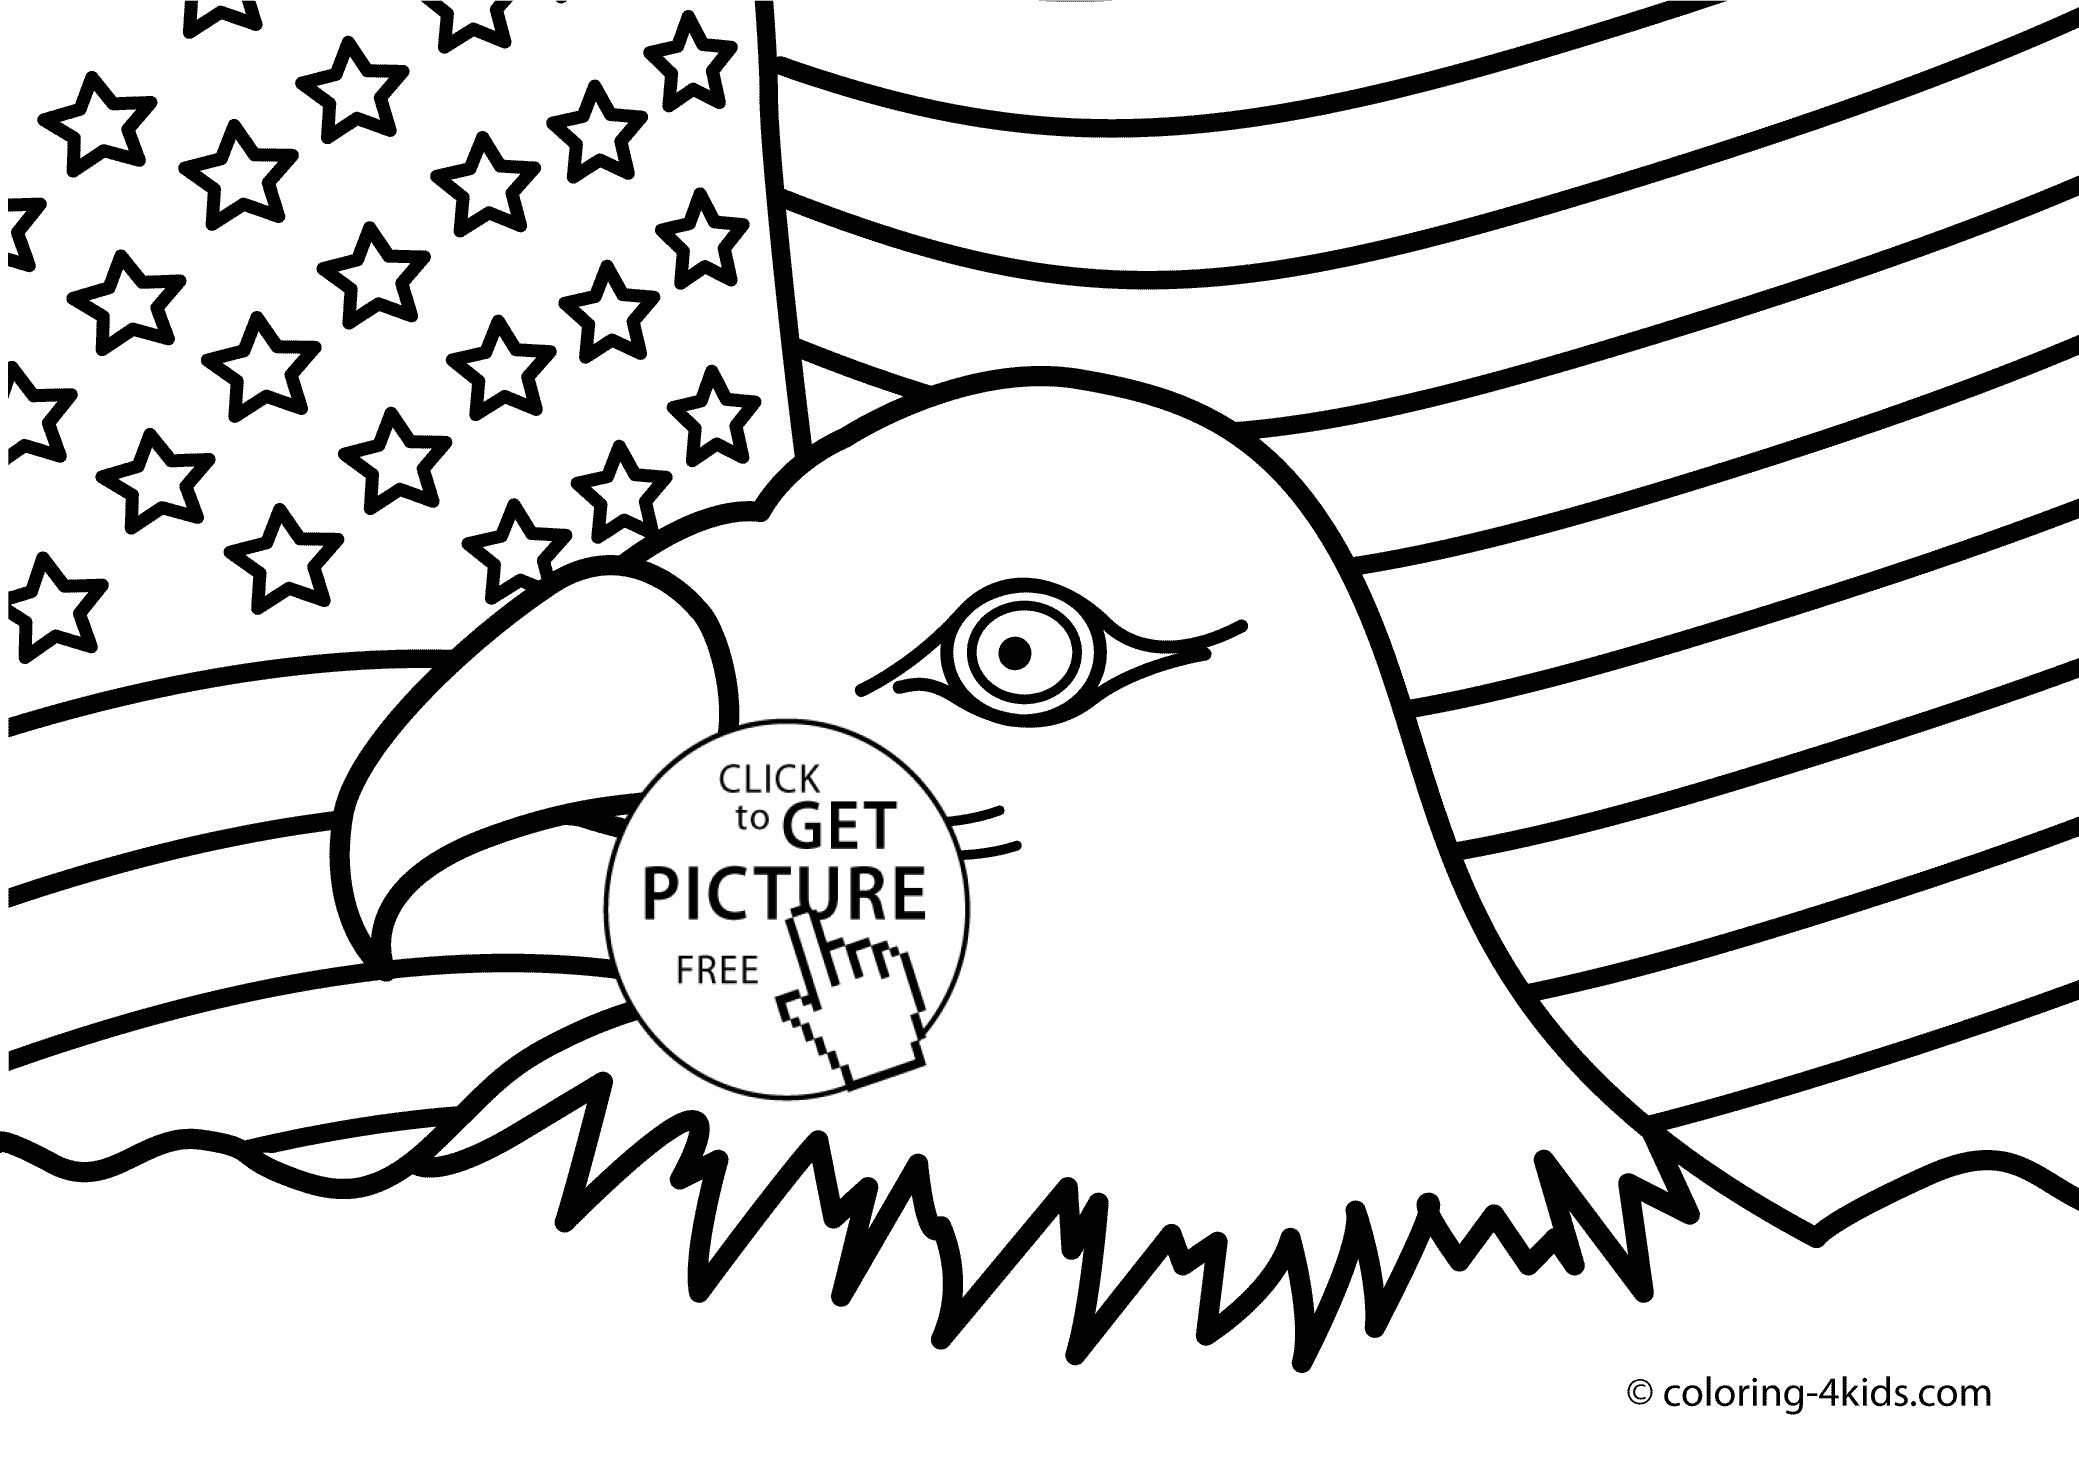 I Love Usa Coloring Pages
 I Love Usa Coloring Pages Download Free Coloring Books